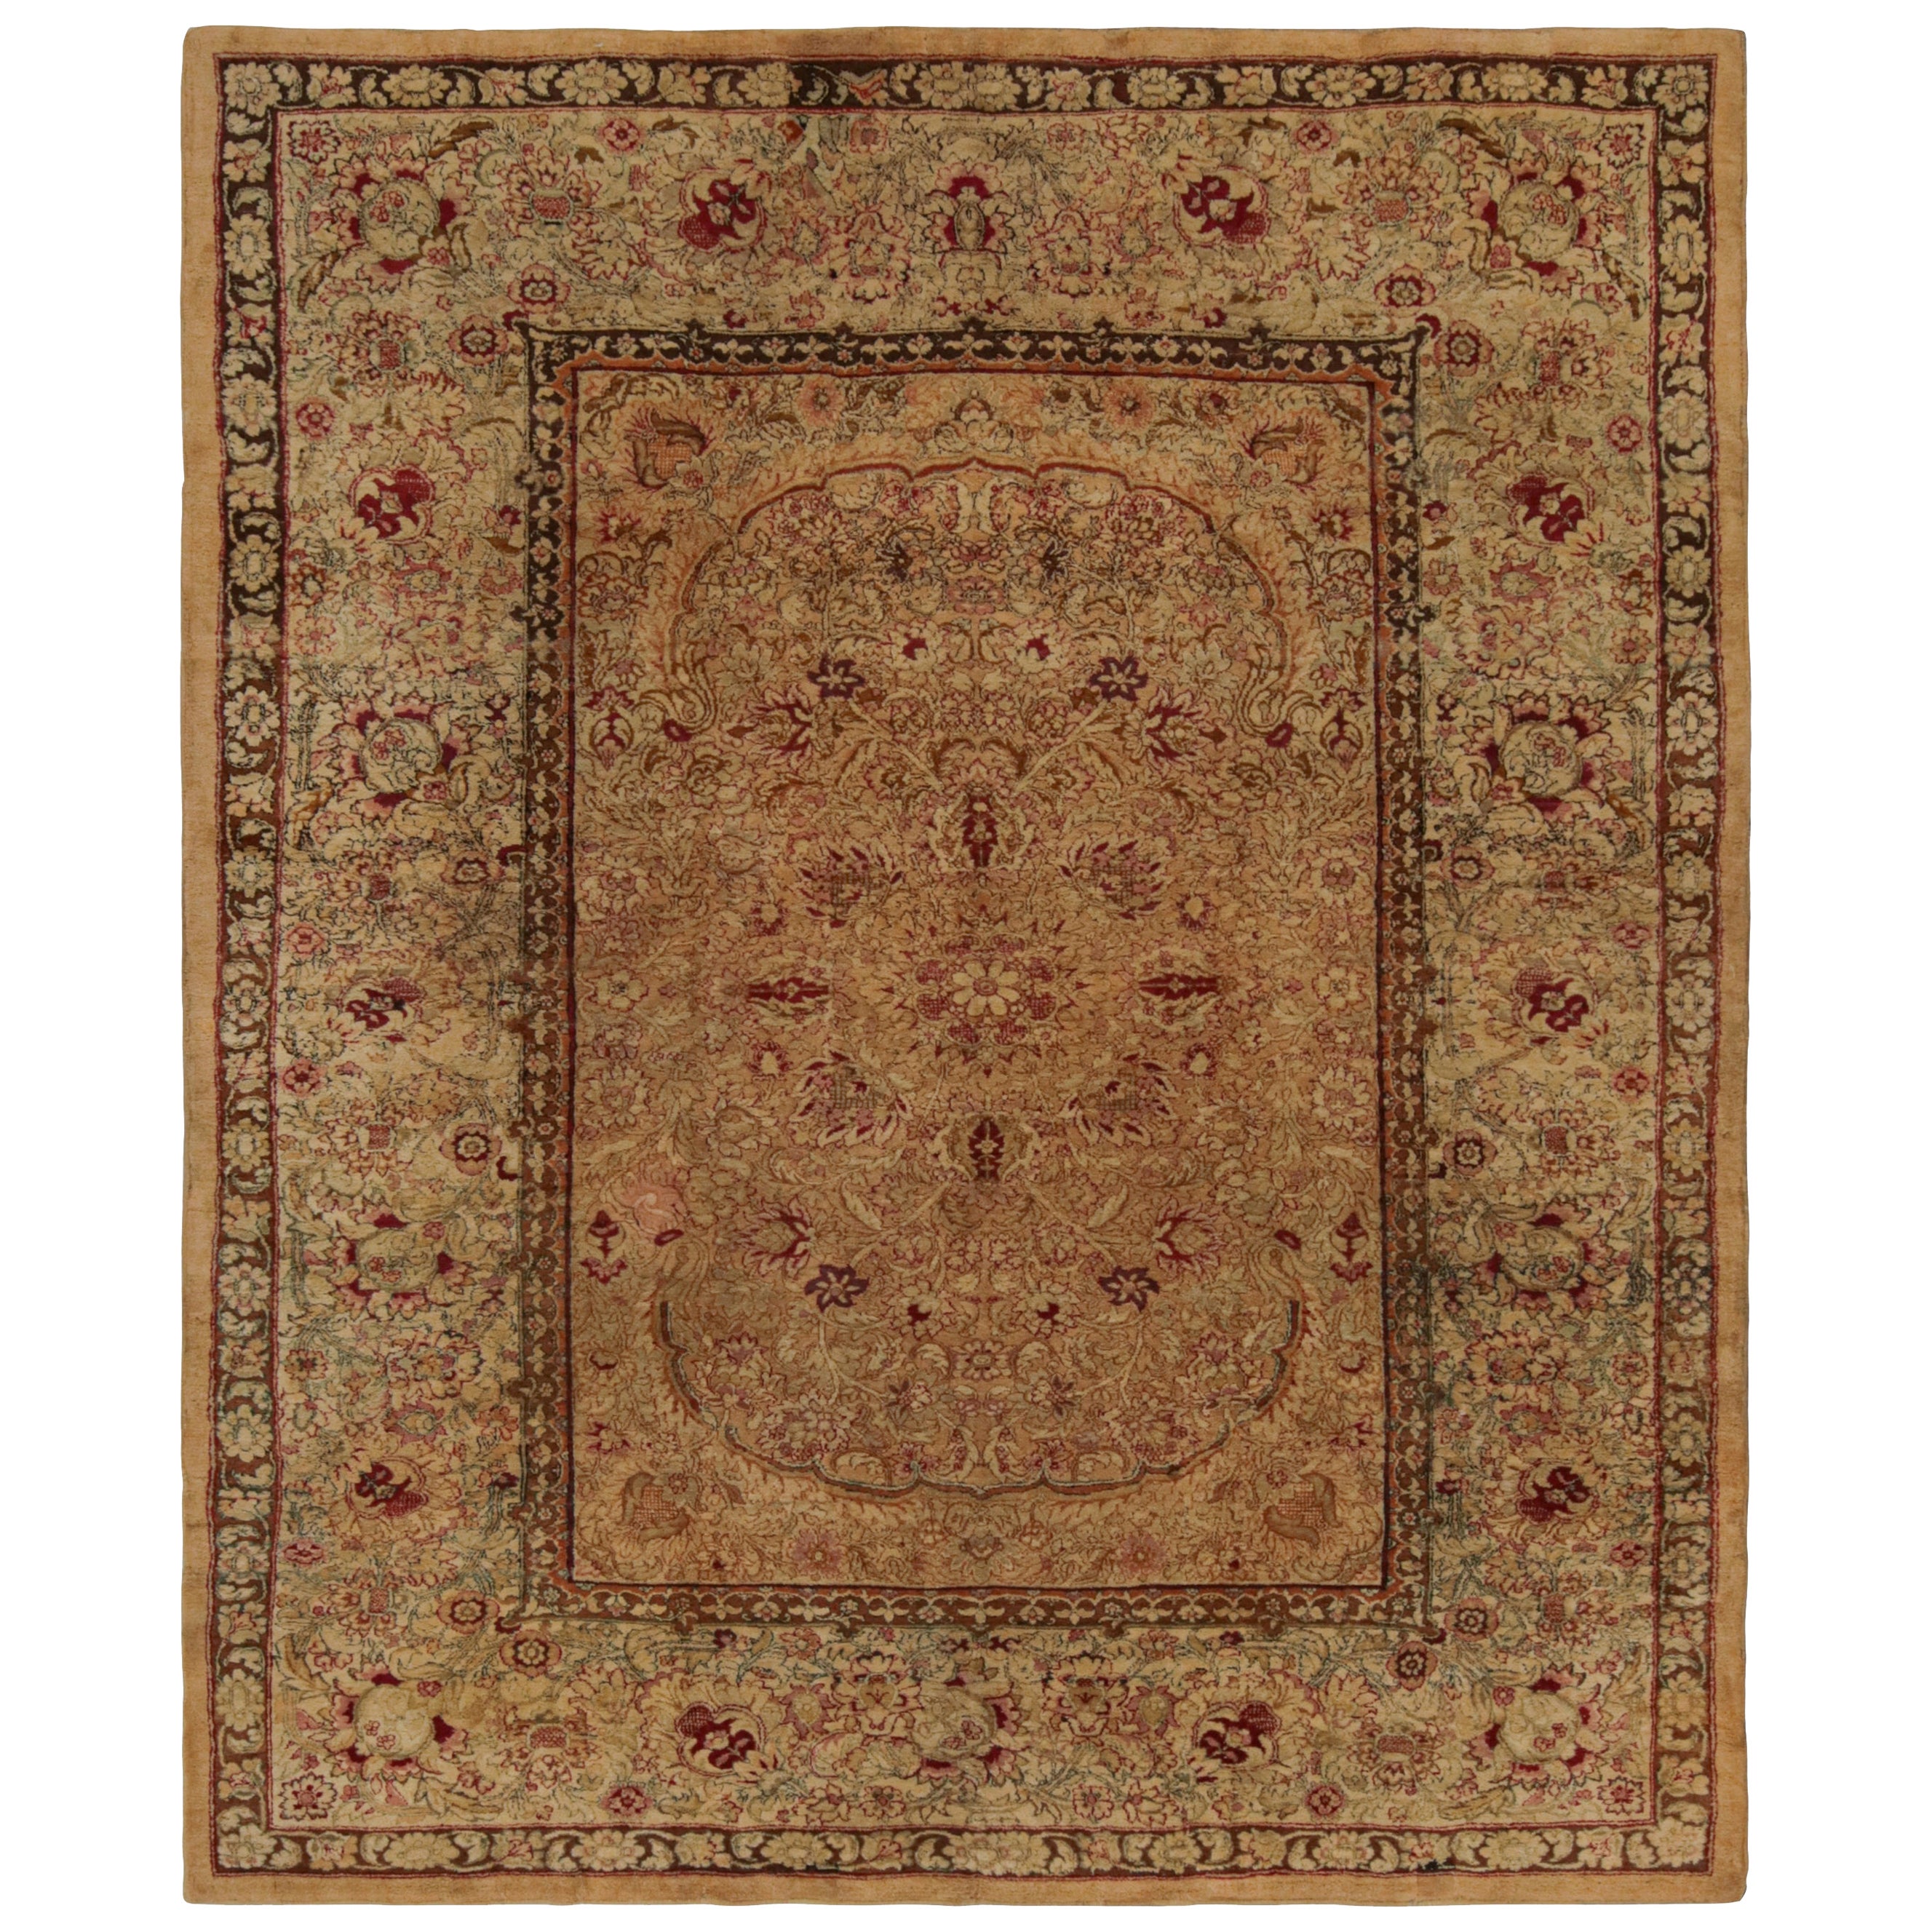 Antique Agra Rug in Gold and Brown with Floral Patterns For Sale